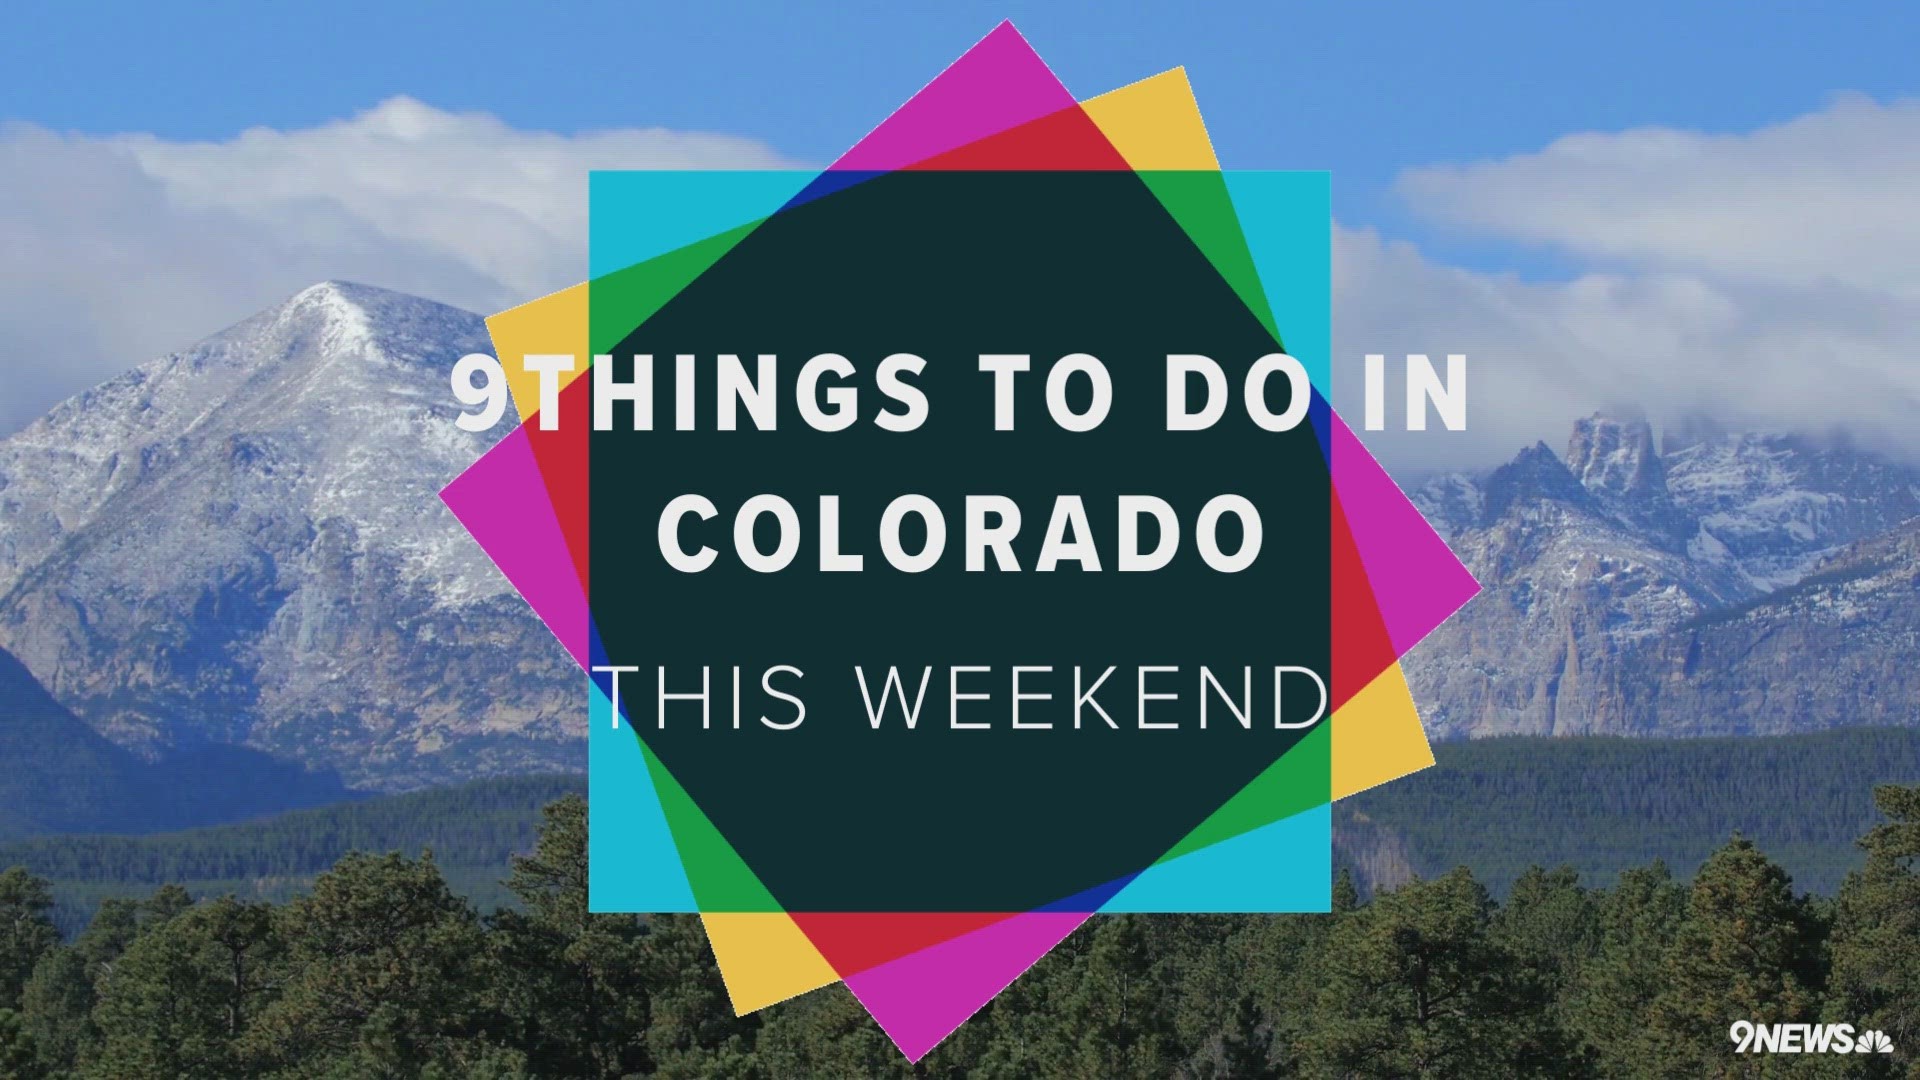 Check out a festival in Aurora, Arvada, Denver, Rocky Ford, Palisade, Fort Collins, Lafayette, Hayden, Severance or Littleton this weekend.